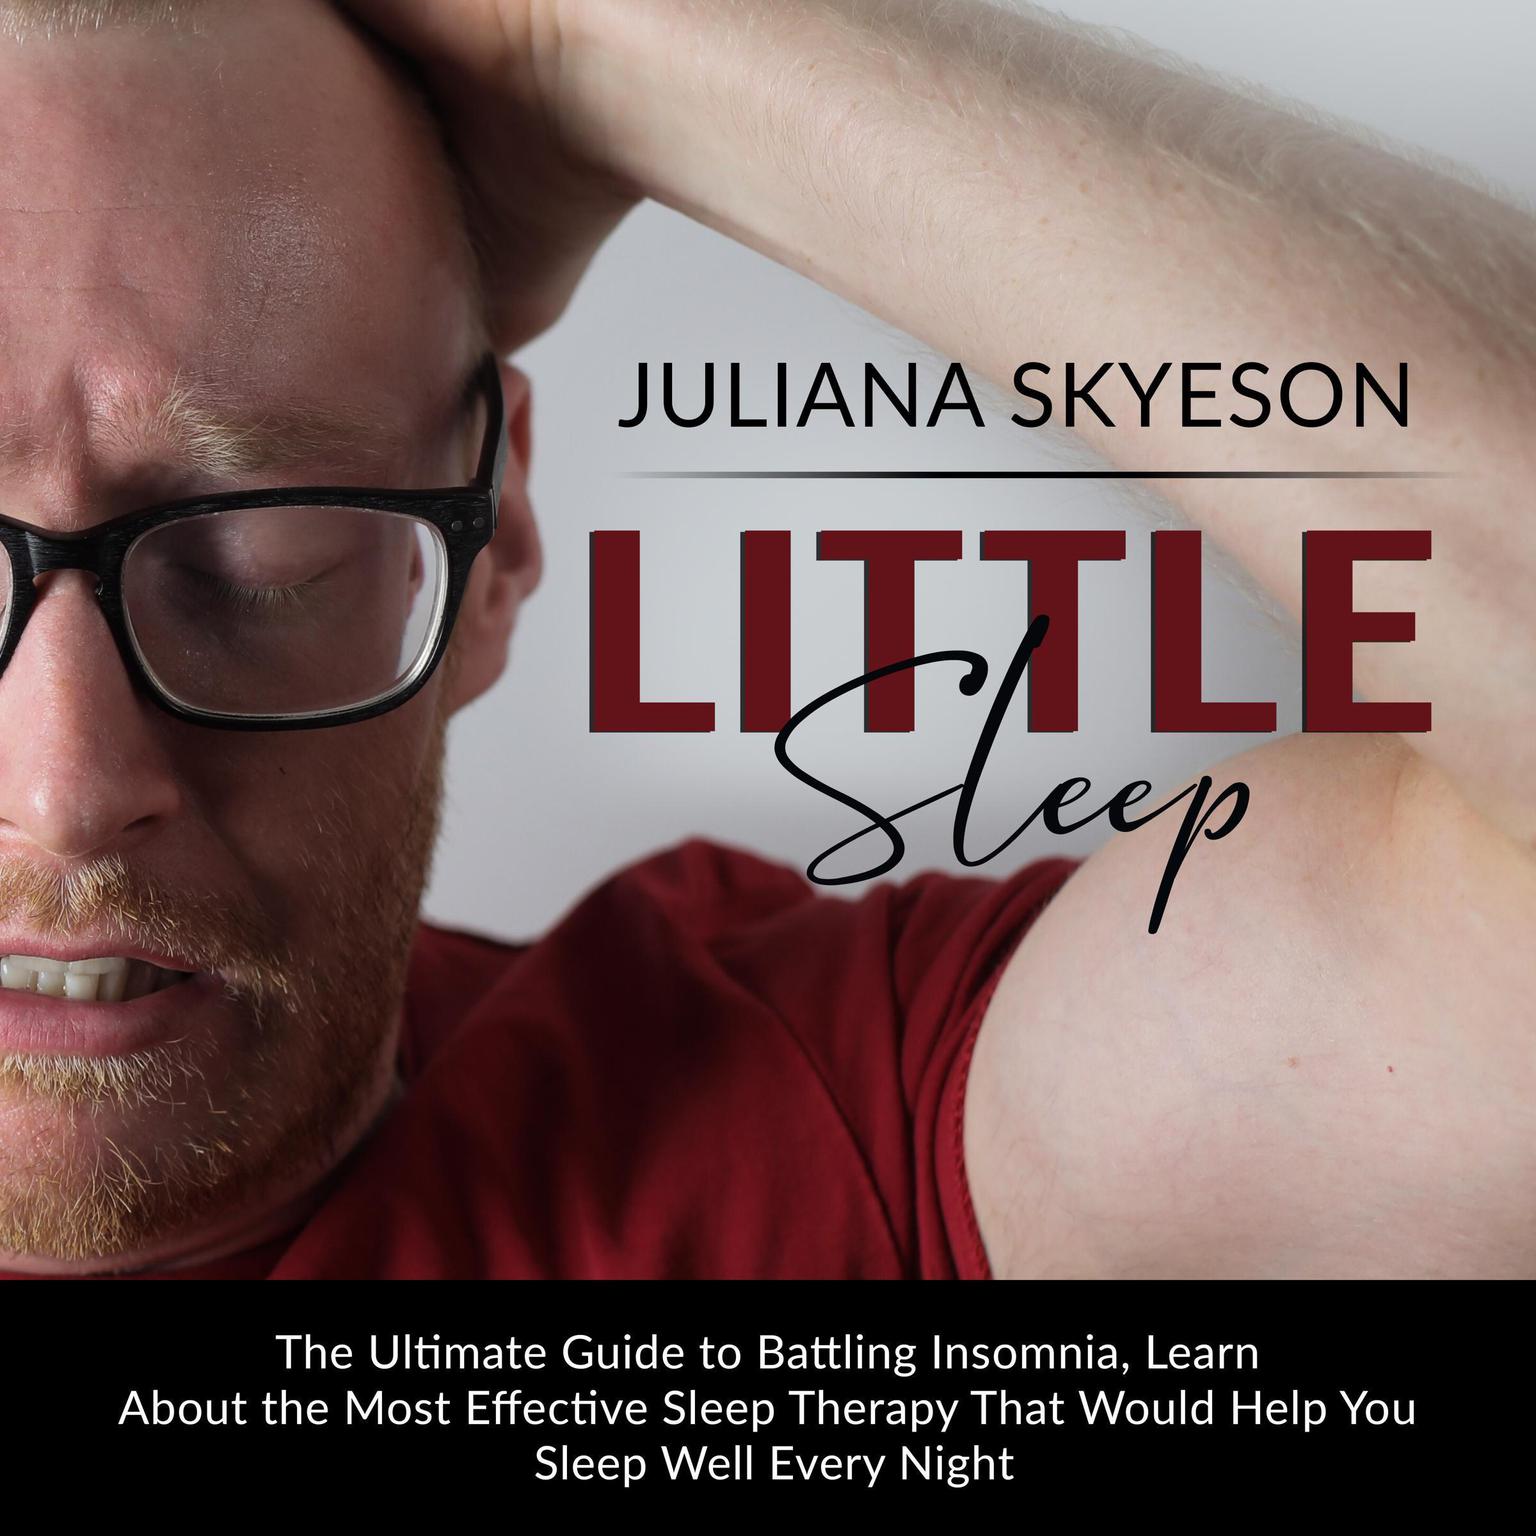 Little Sleep: The Ultimate Guide to Battling Insomnia, Learn About The Most Effective Sleep Therapy That Would Help You Sleep Well Every Night Audiobook, by Juliana Skyeson